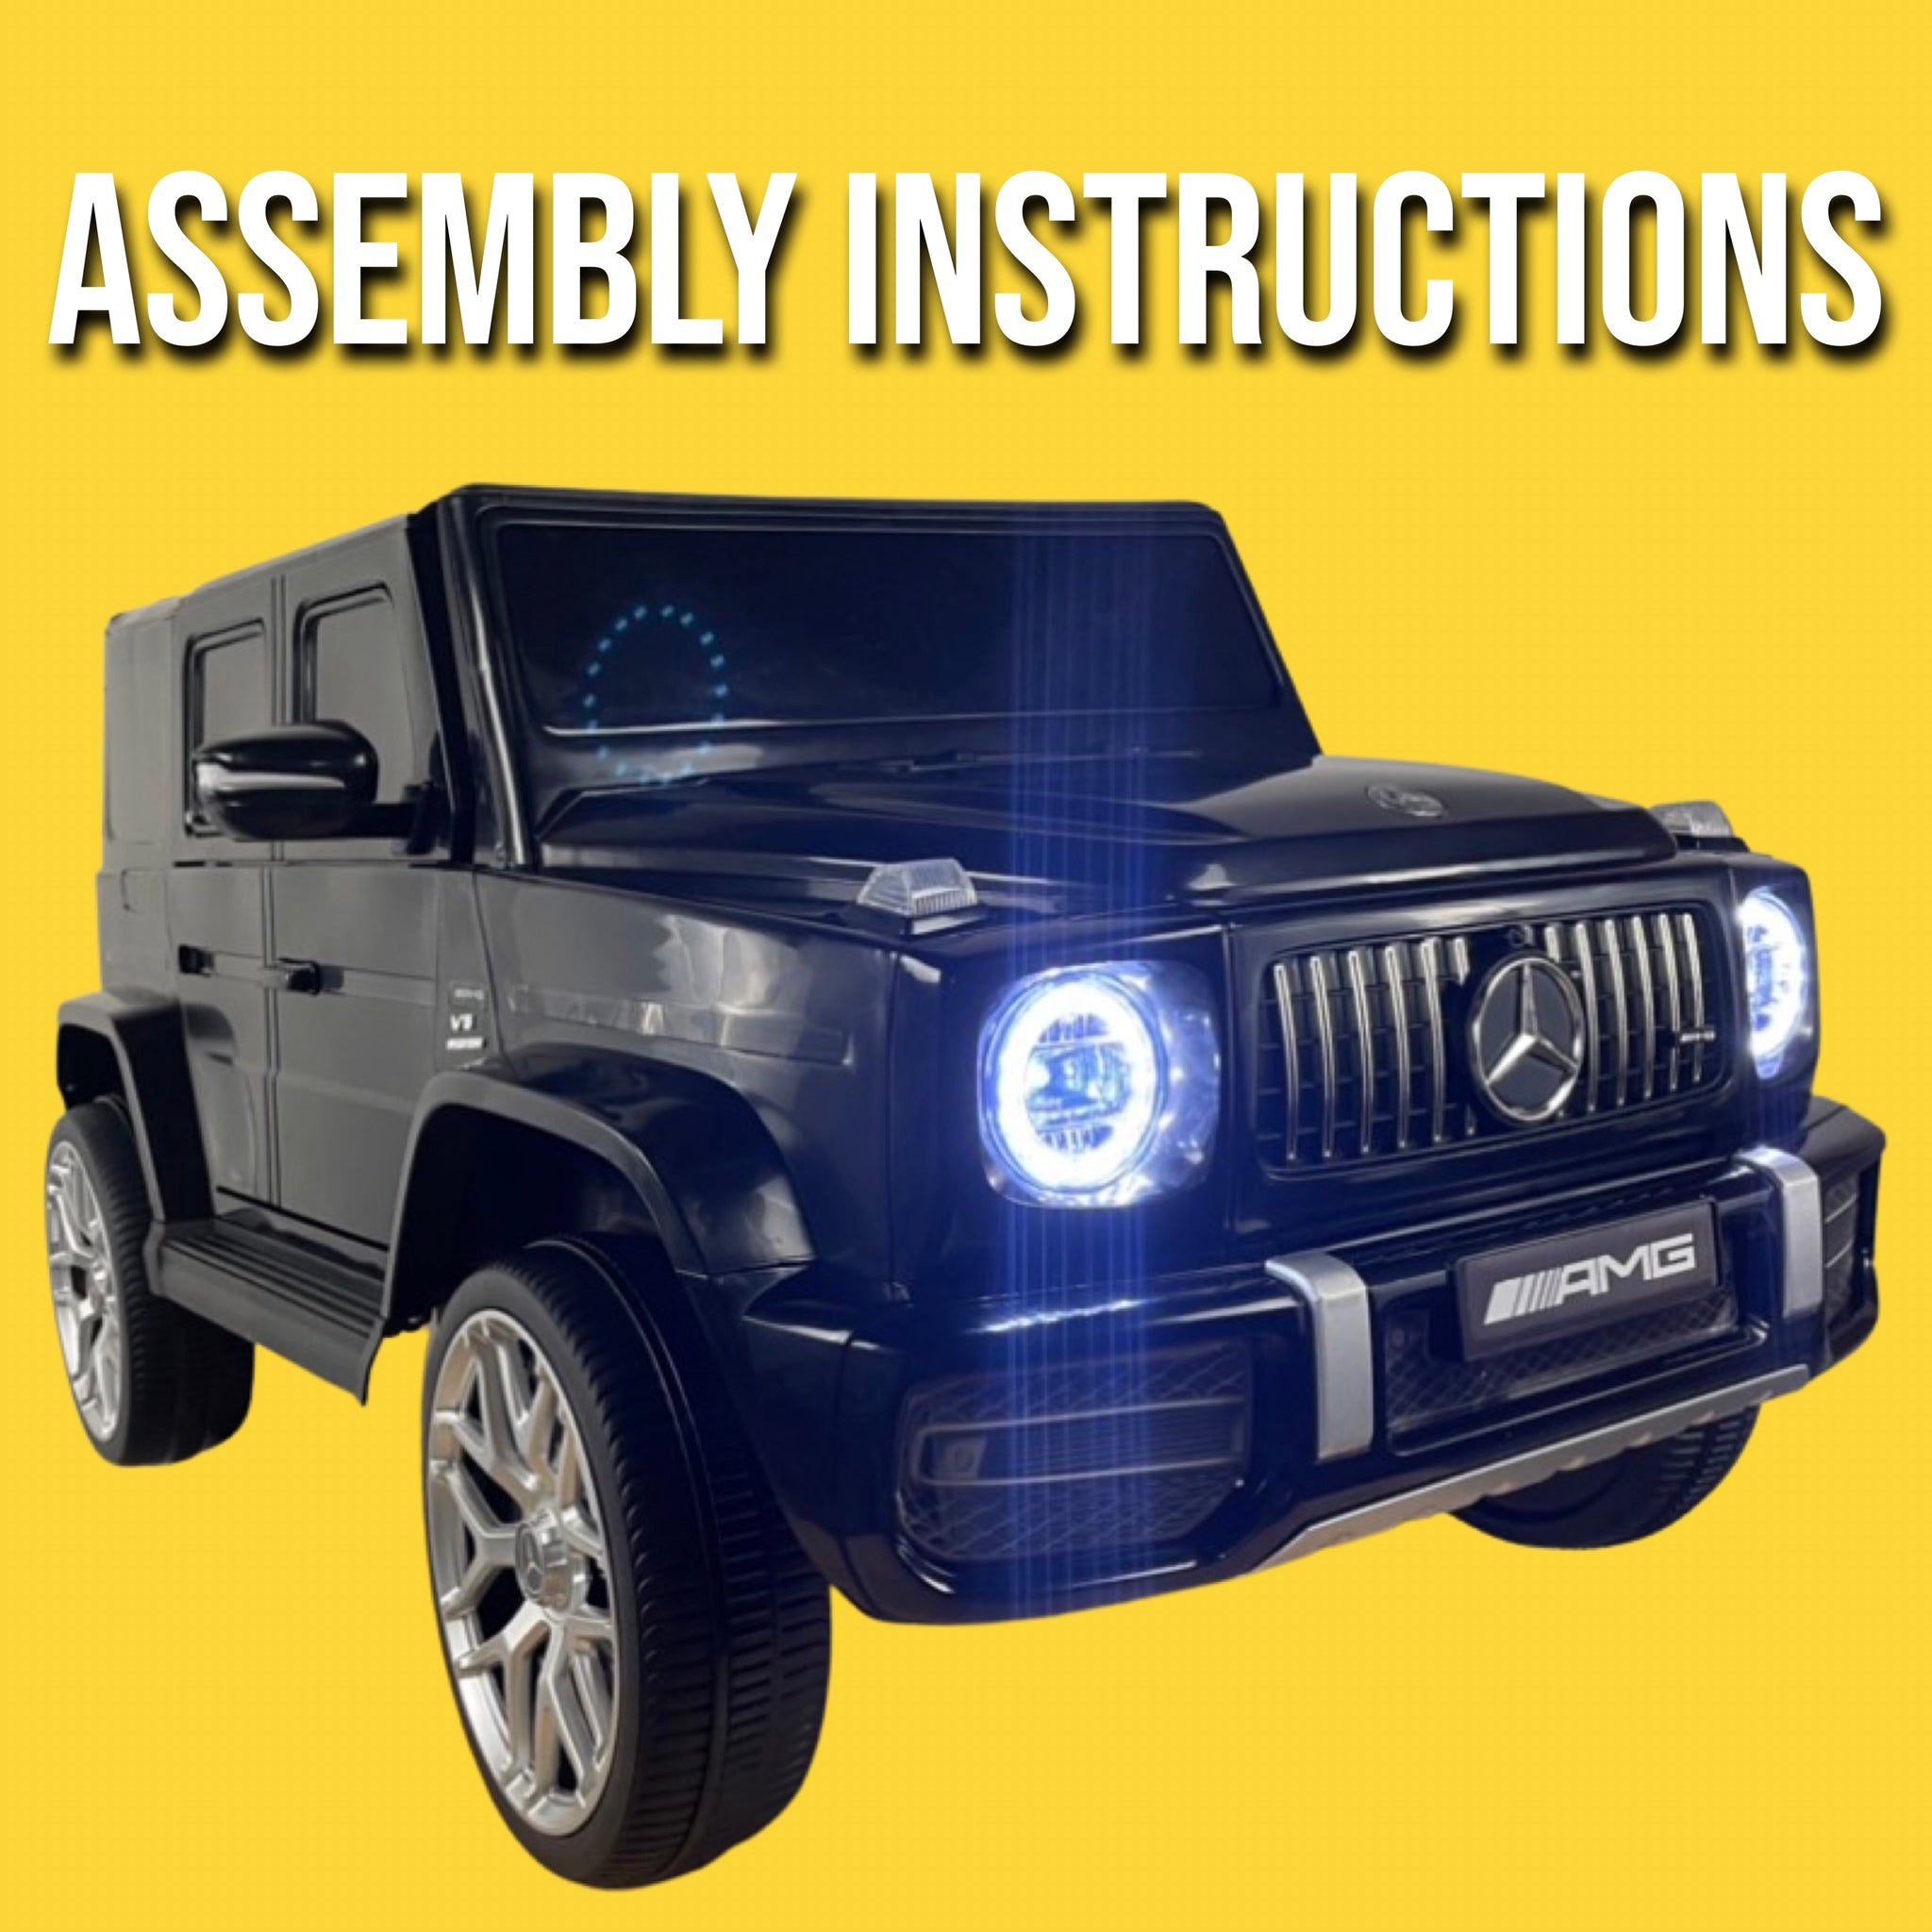 Assembly Video for Mercedes Benz G63 Ride On Kid Car Instructions R&G TOYS